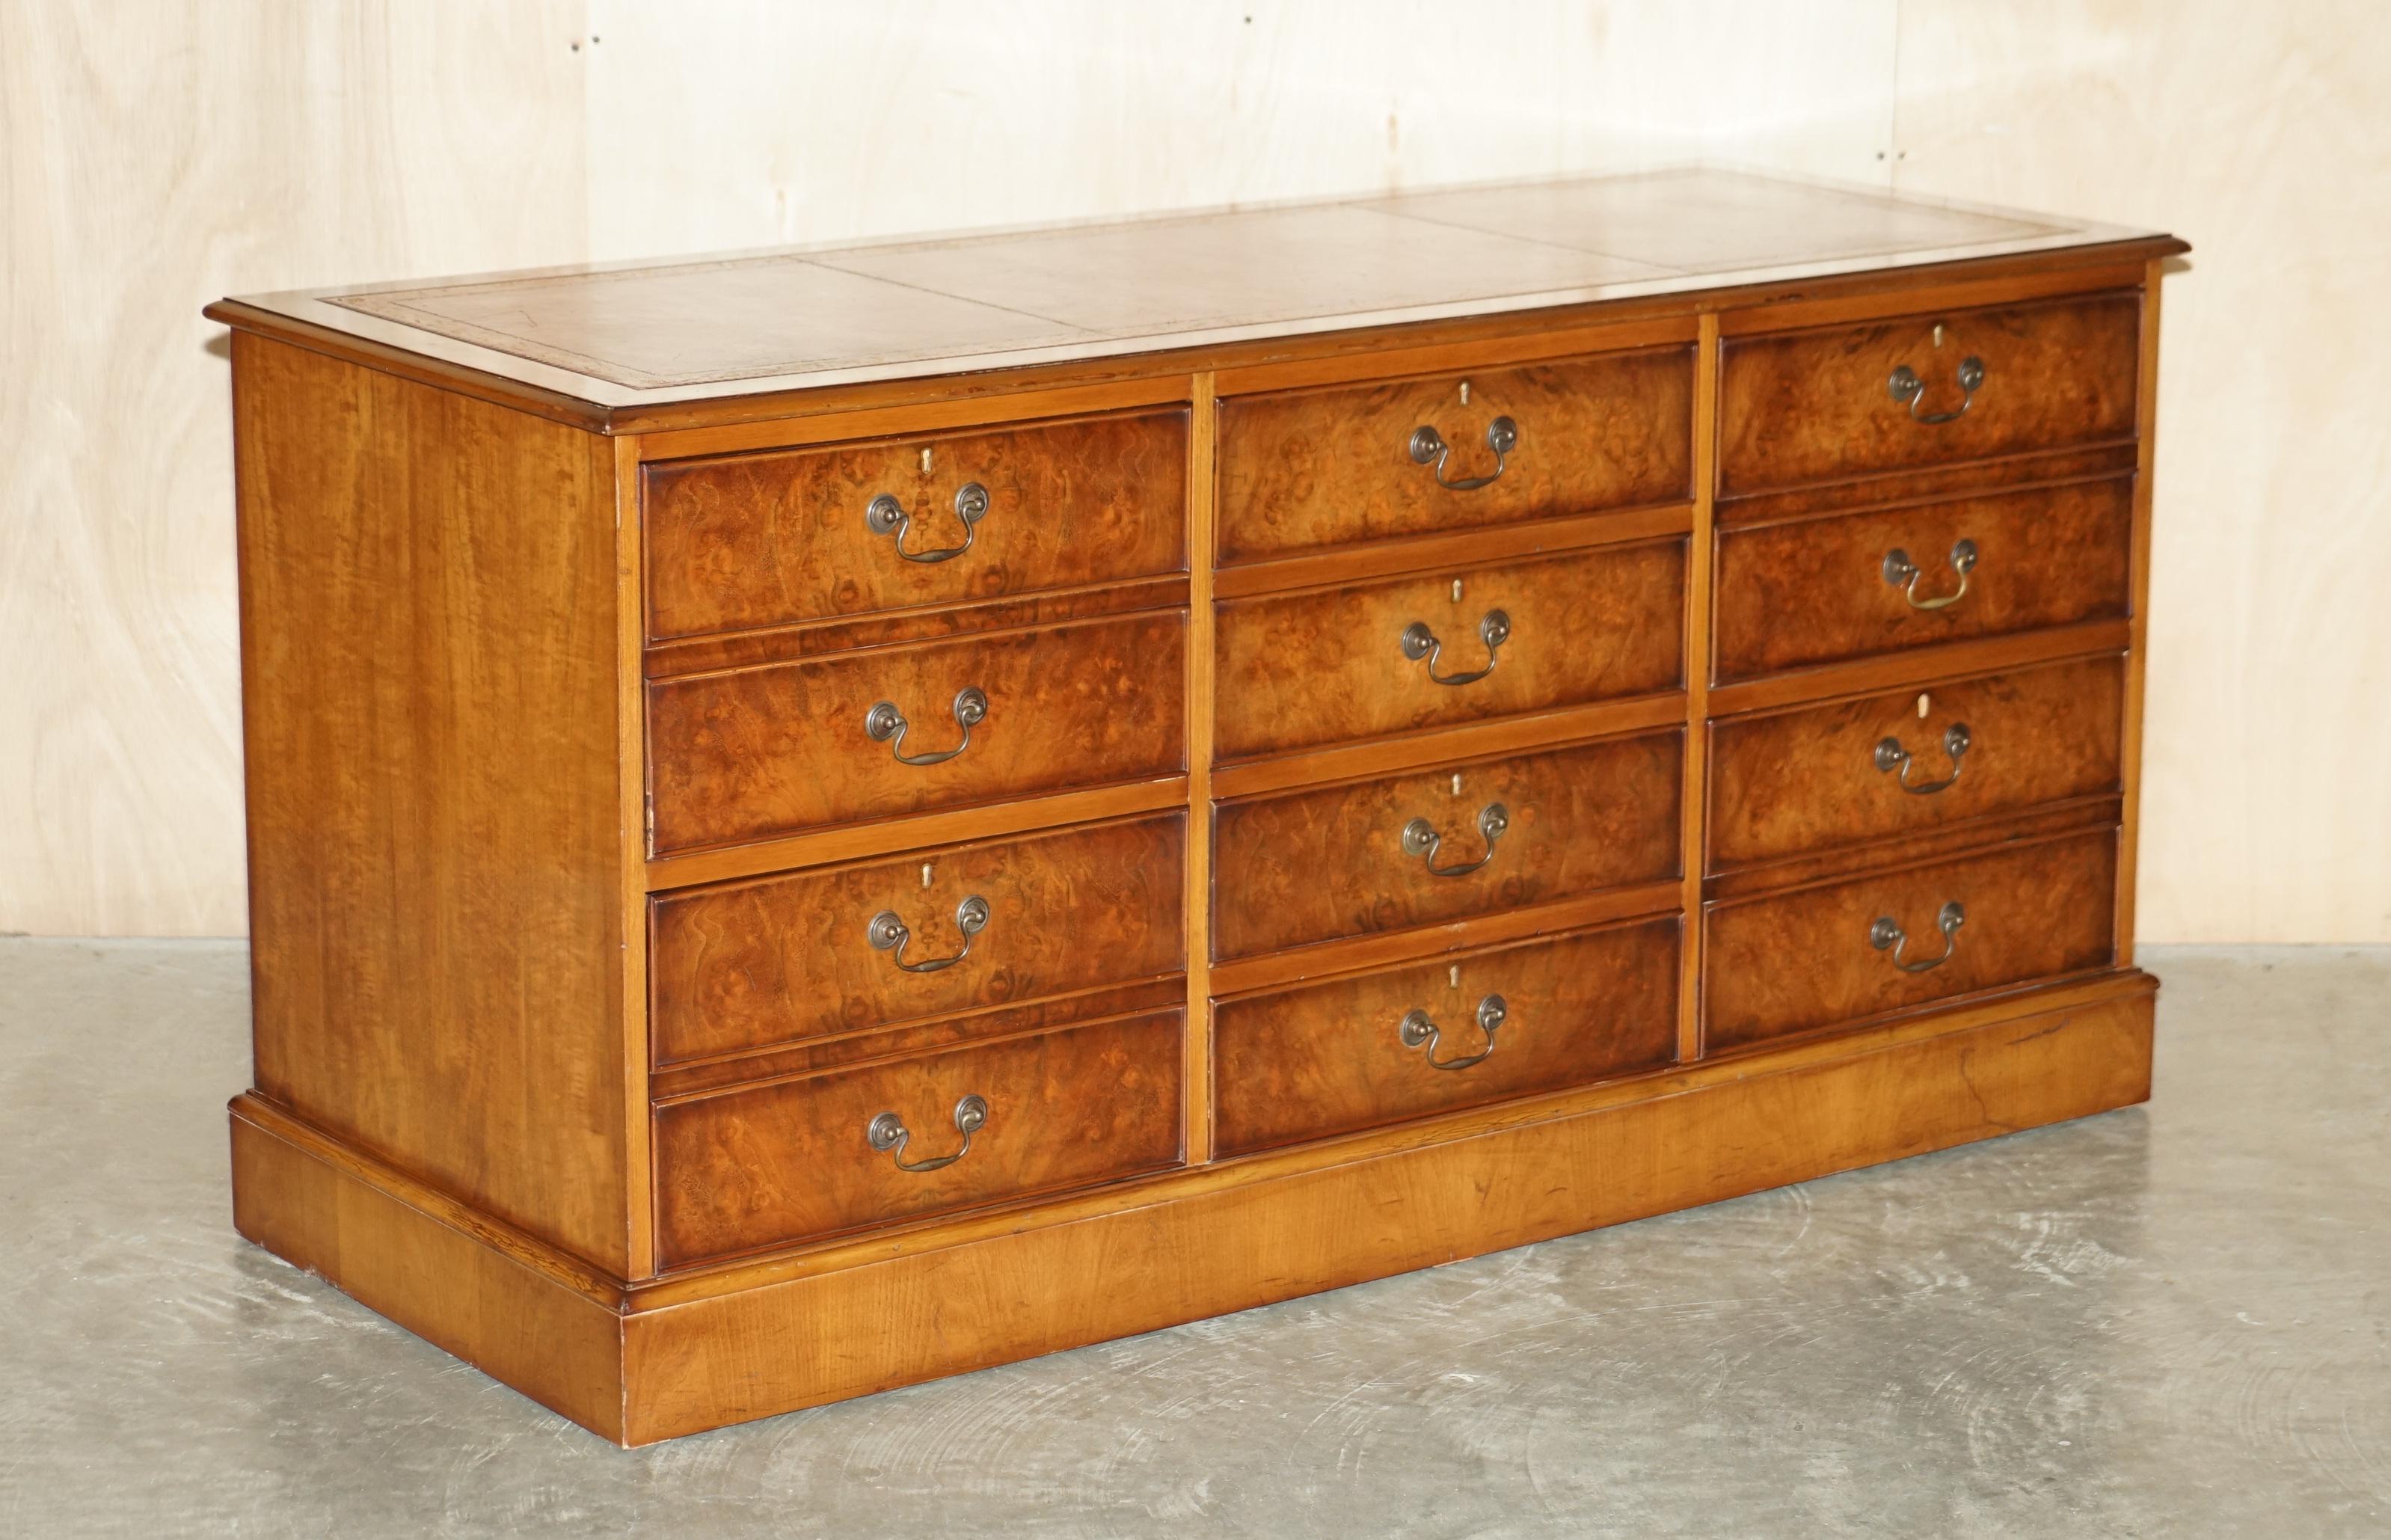 We are delighted to offer for sale this lovely Burr Walnut triple bank filing cabinet with three drawers to the middle and Oxblood leather top

A truly stunning piece, if burr walnut is your thing or just timber patina that is to die for then look